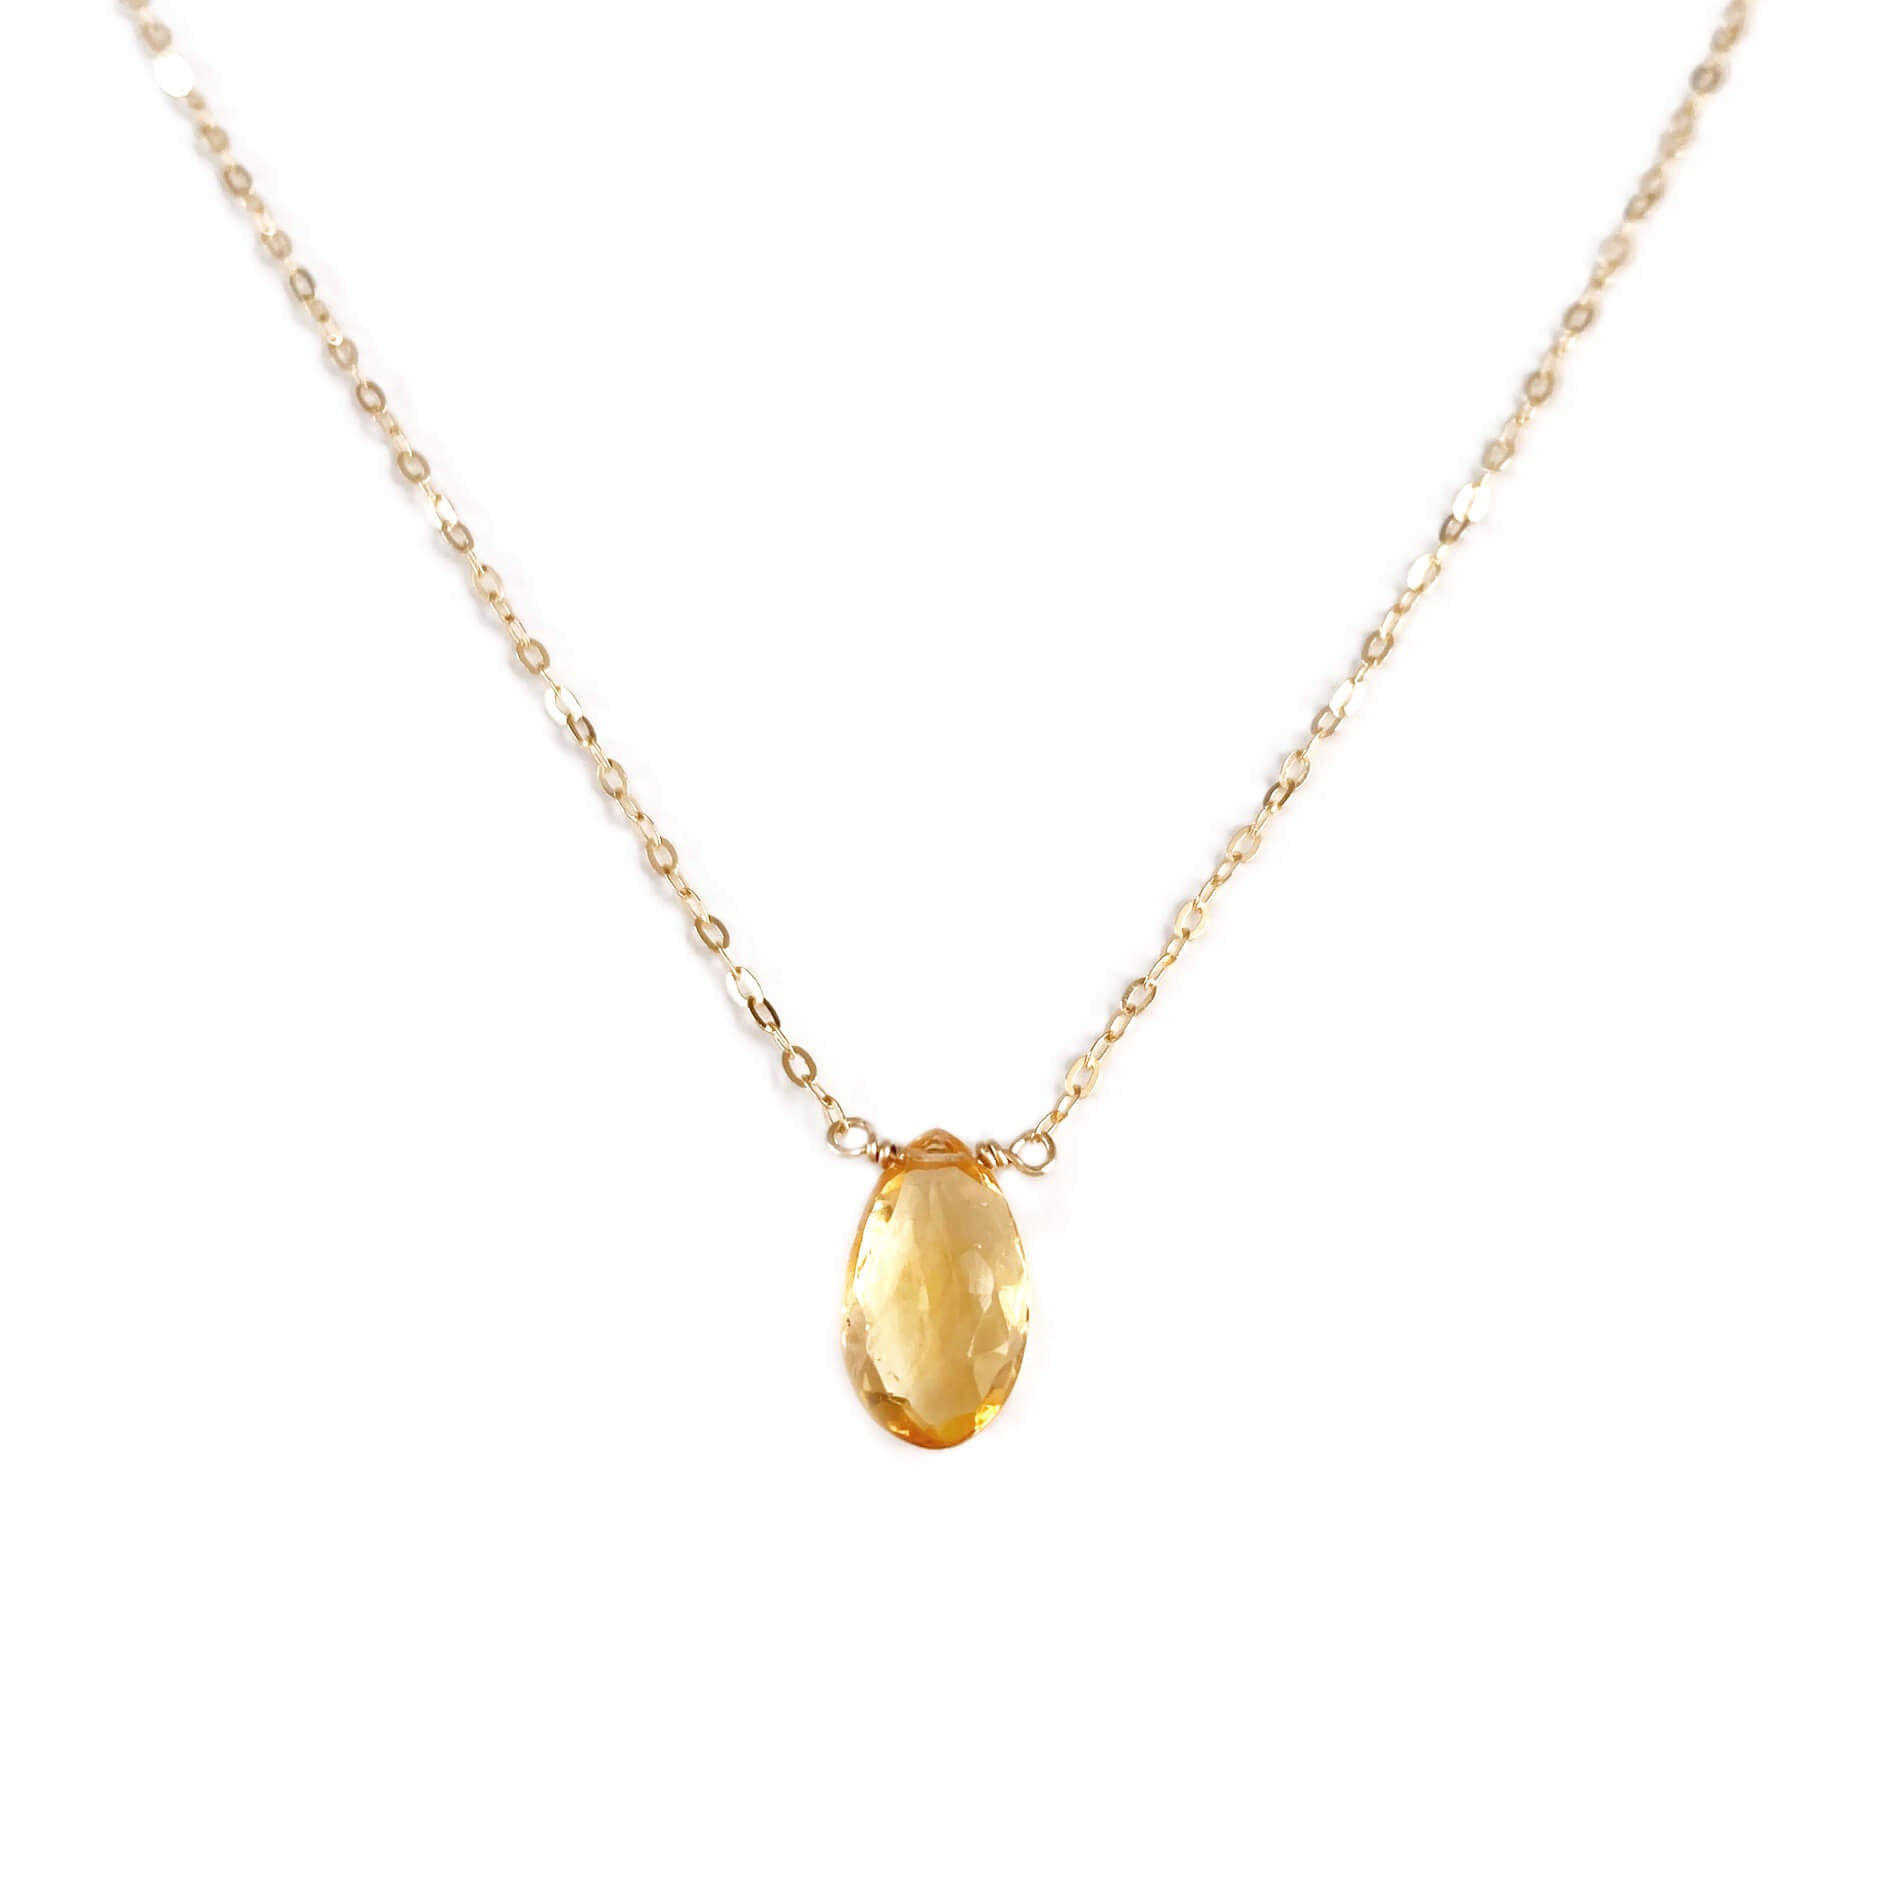 Dainty citrine necklace is made of 14k dainty gold and a single real natural citrine gemstone. 